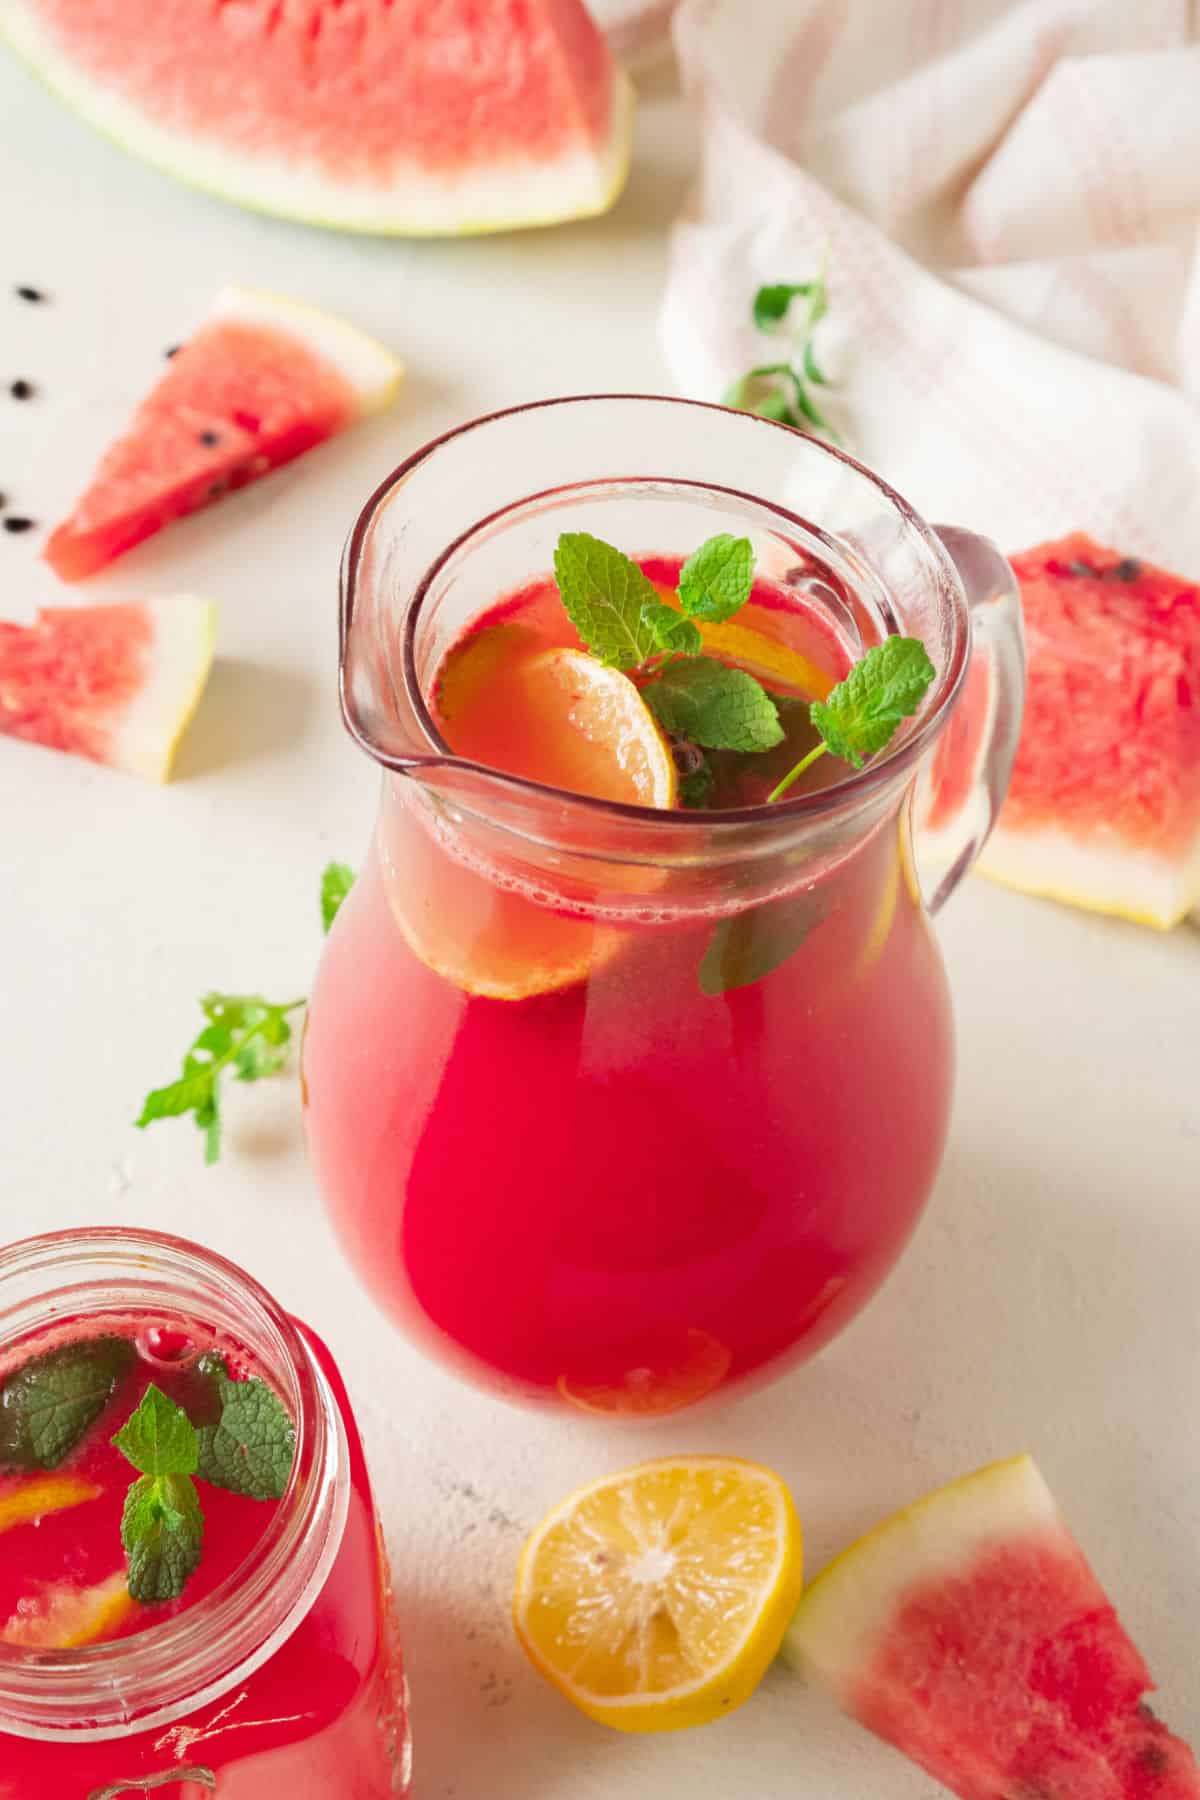 Watermelon pieces surrounding a pitcher of watermelon lemonade with mint leaves.